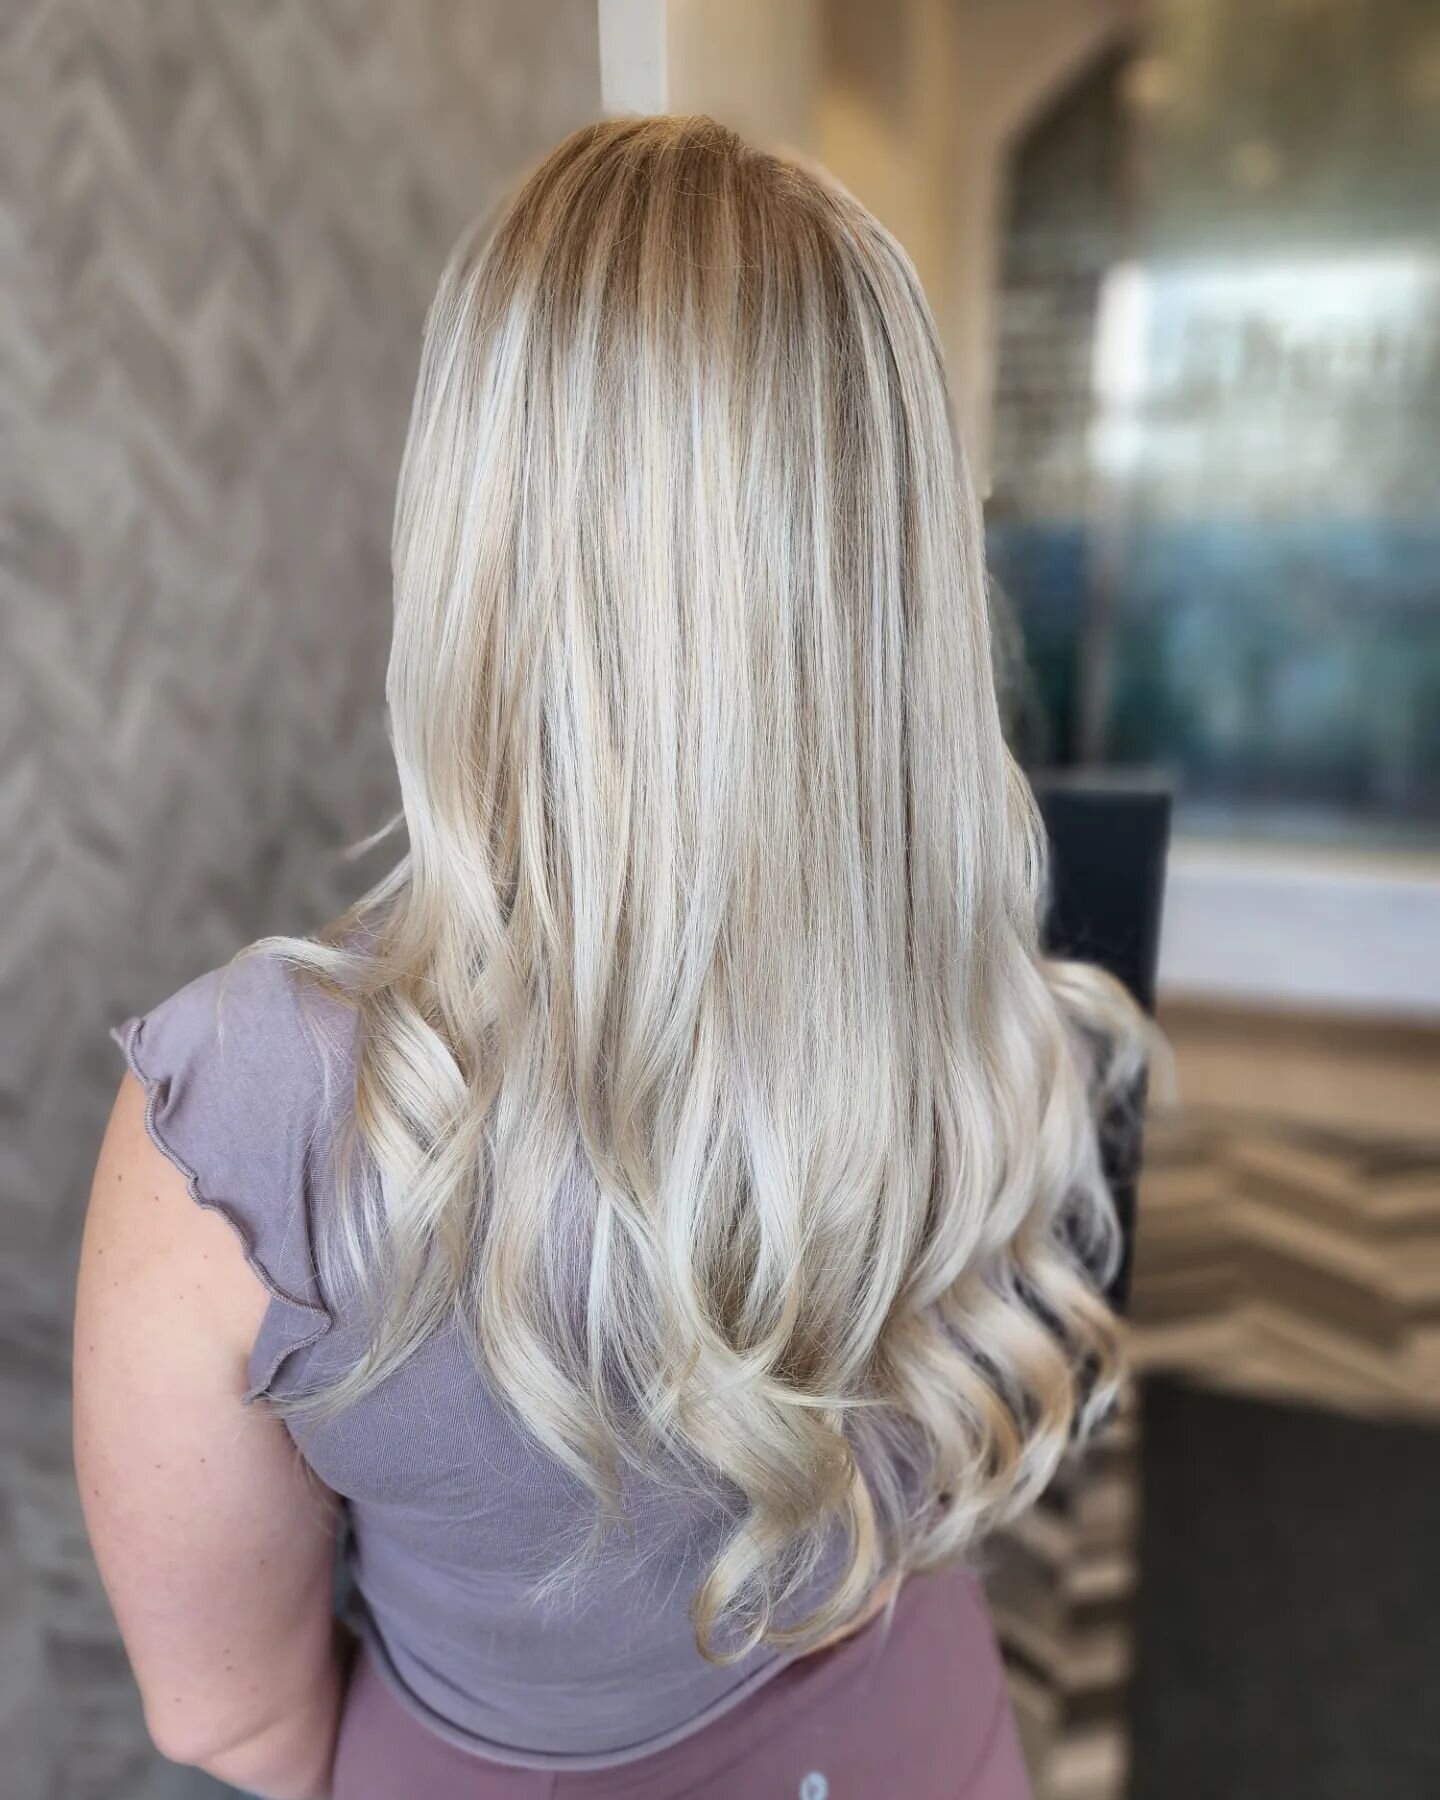 ❄️❄️
Going blonde isn't just about throwing bleach on the hair and calling it a day. I will always take care with the integrity of your hair so it can be long AND HEALTHY. 
❄️❄️